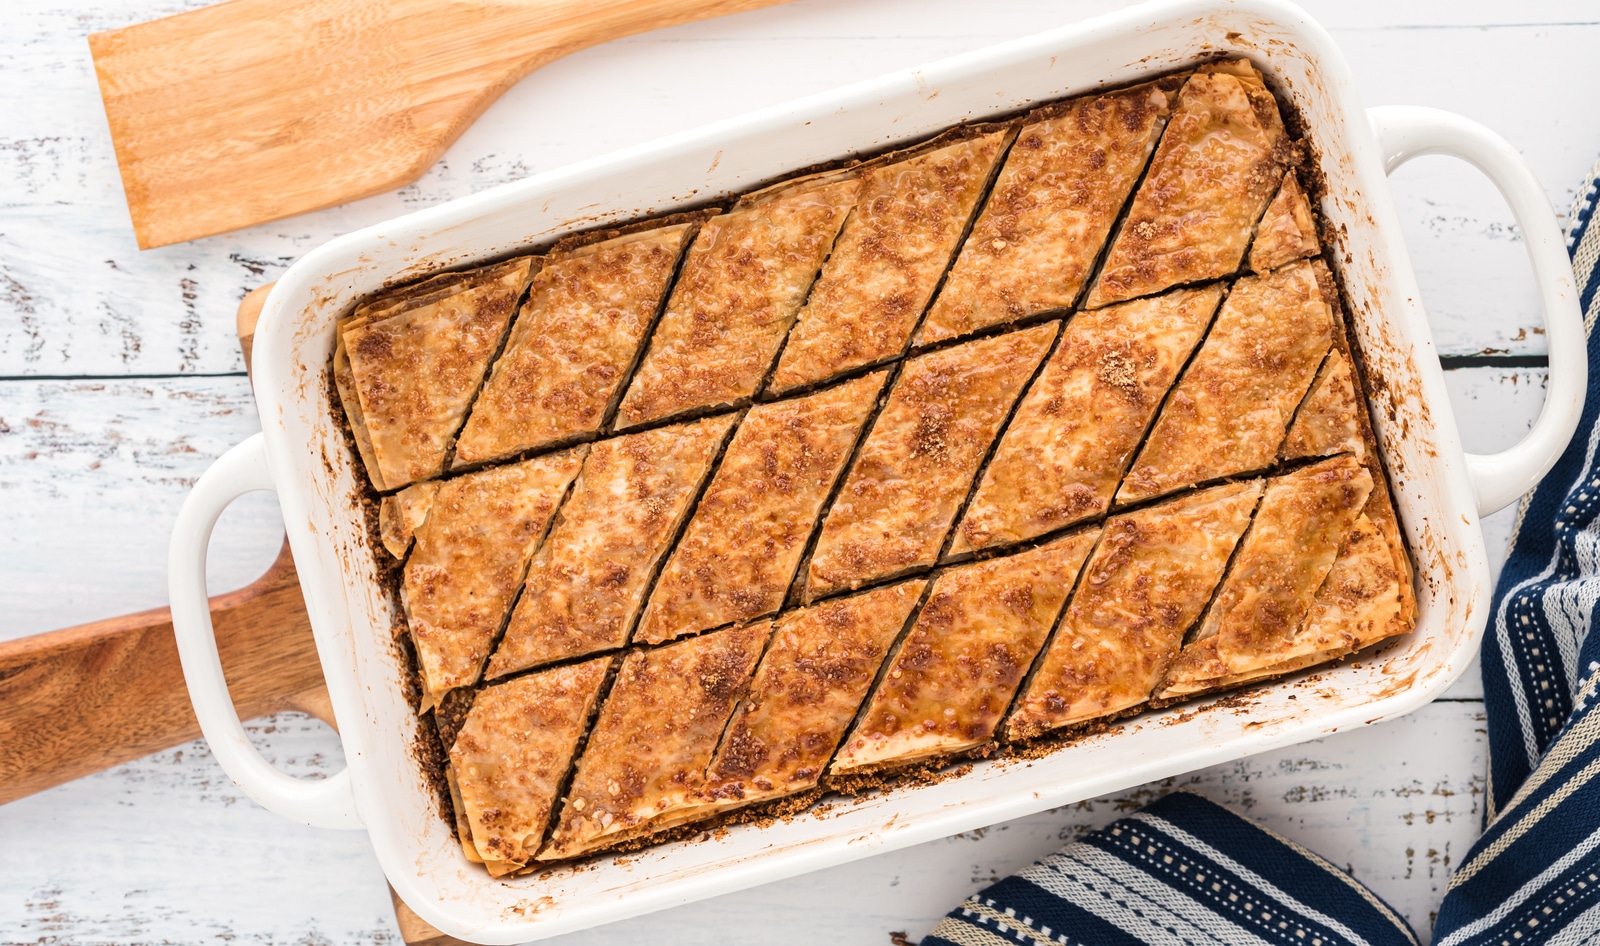 Perfect the Art of Baklava: How to Make, Store, and Freeze the Popular Middle Eastern Dessert